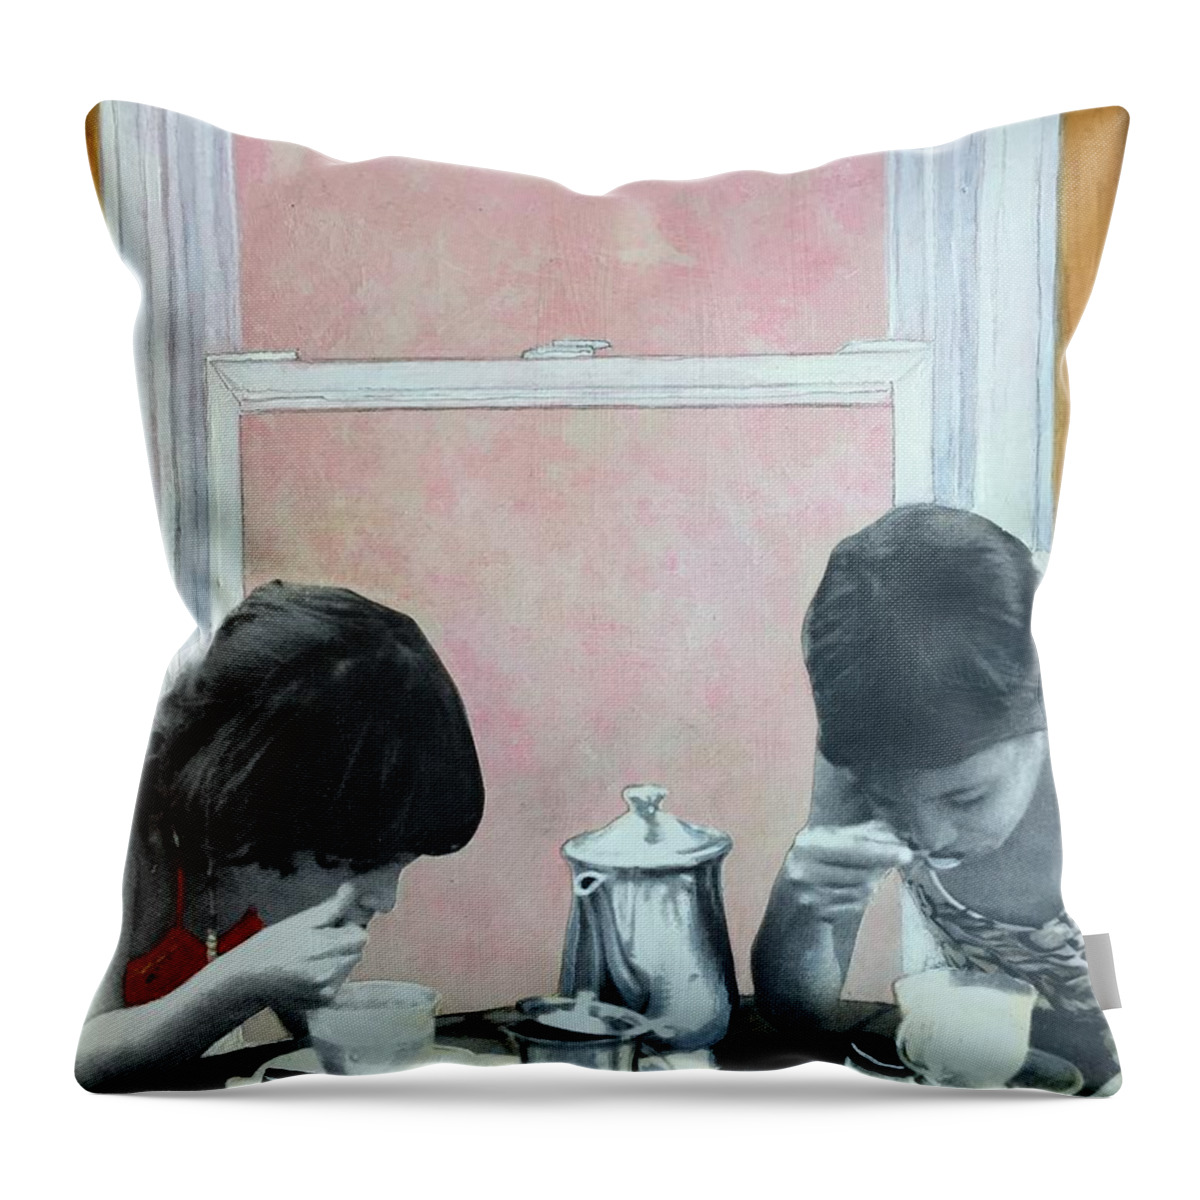 Tea Party Throw Pillow featuring the painting Tea Party by Leah Tomaino